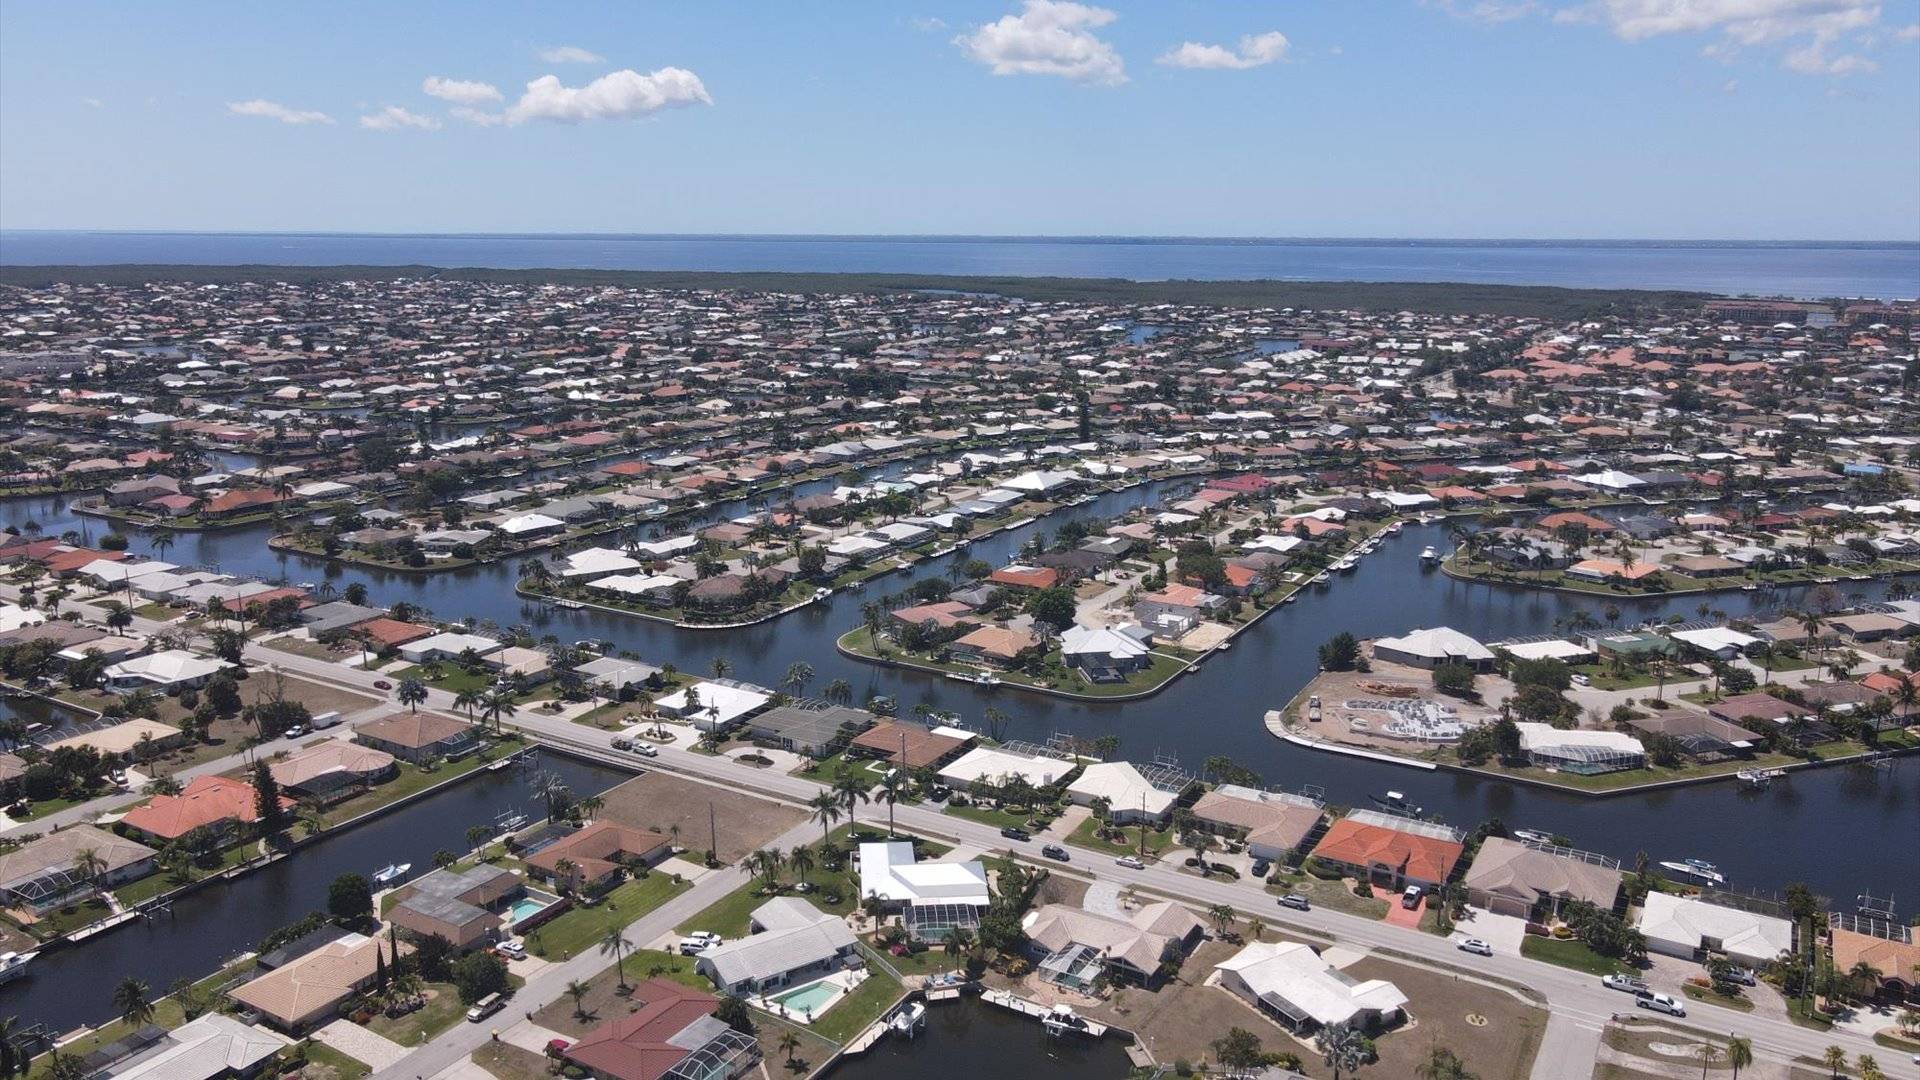 Punta Gorda Isles canal system leads to Charlotte Harbor